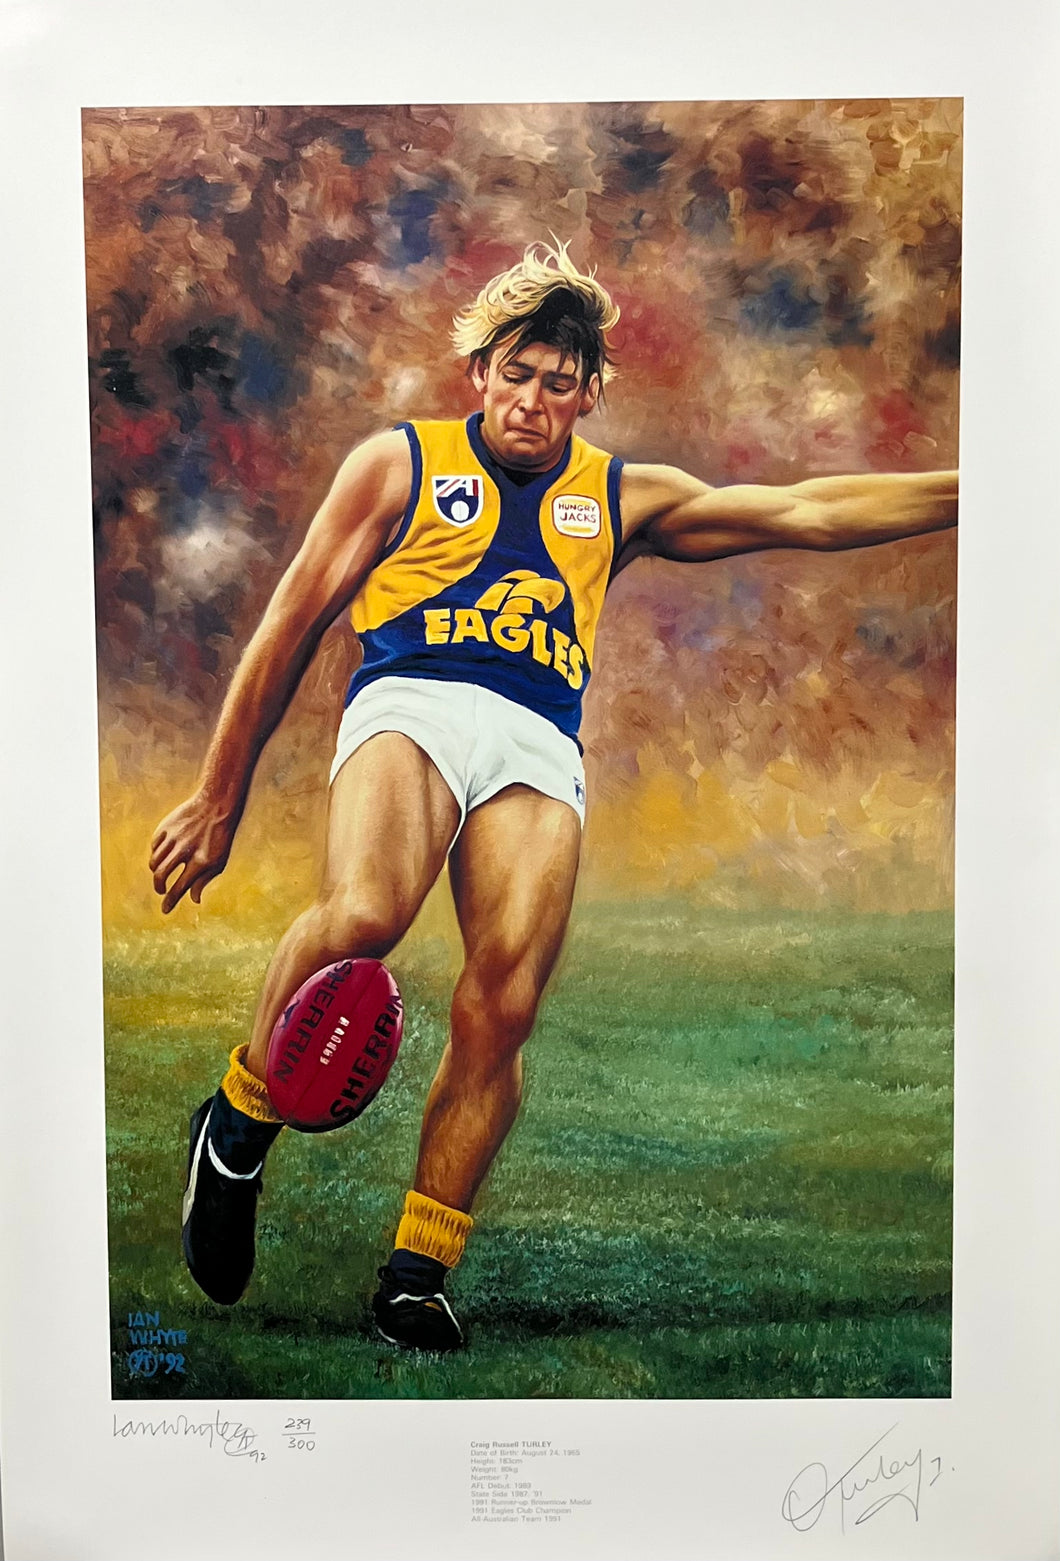 Ian Whyte 1992 West Coast Eagles Craig Turley Limited Edition Lithograph 239/300 - Personally Signed